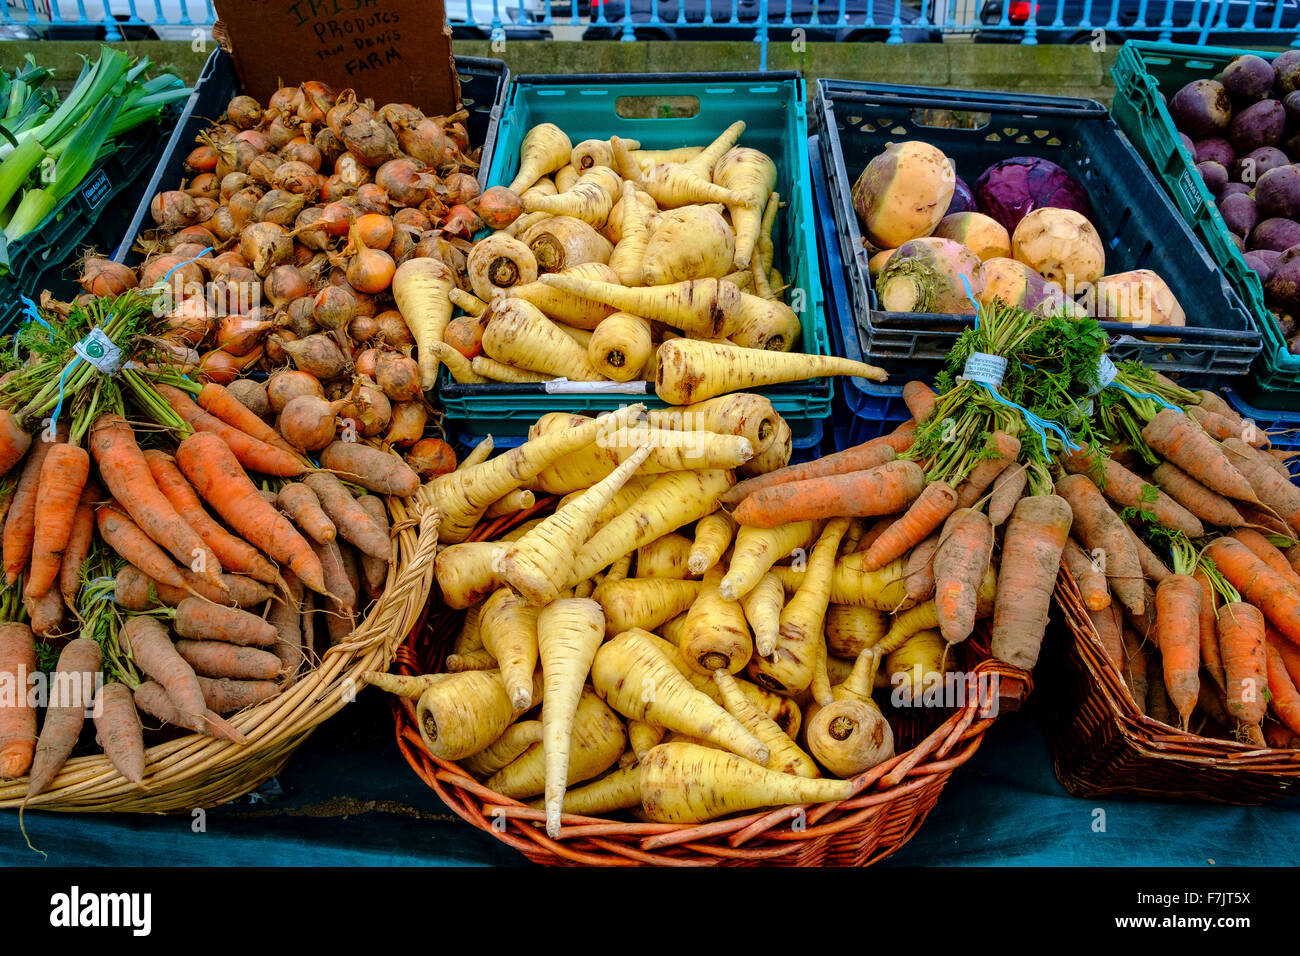 root vegetables carrot parsnip swede turnip onion Stock Photo